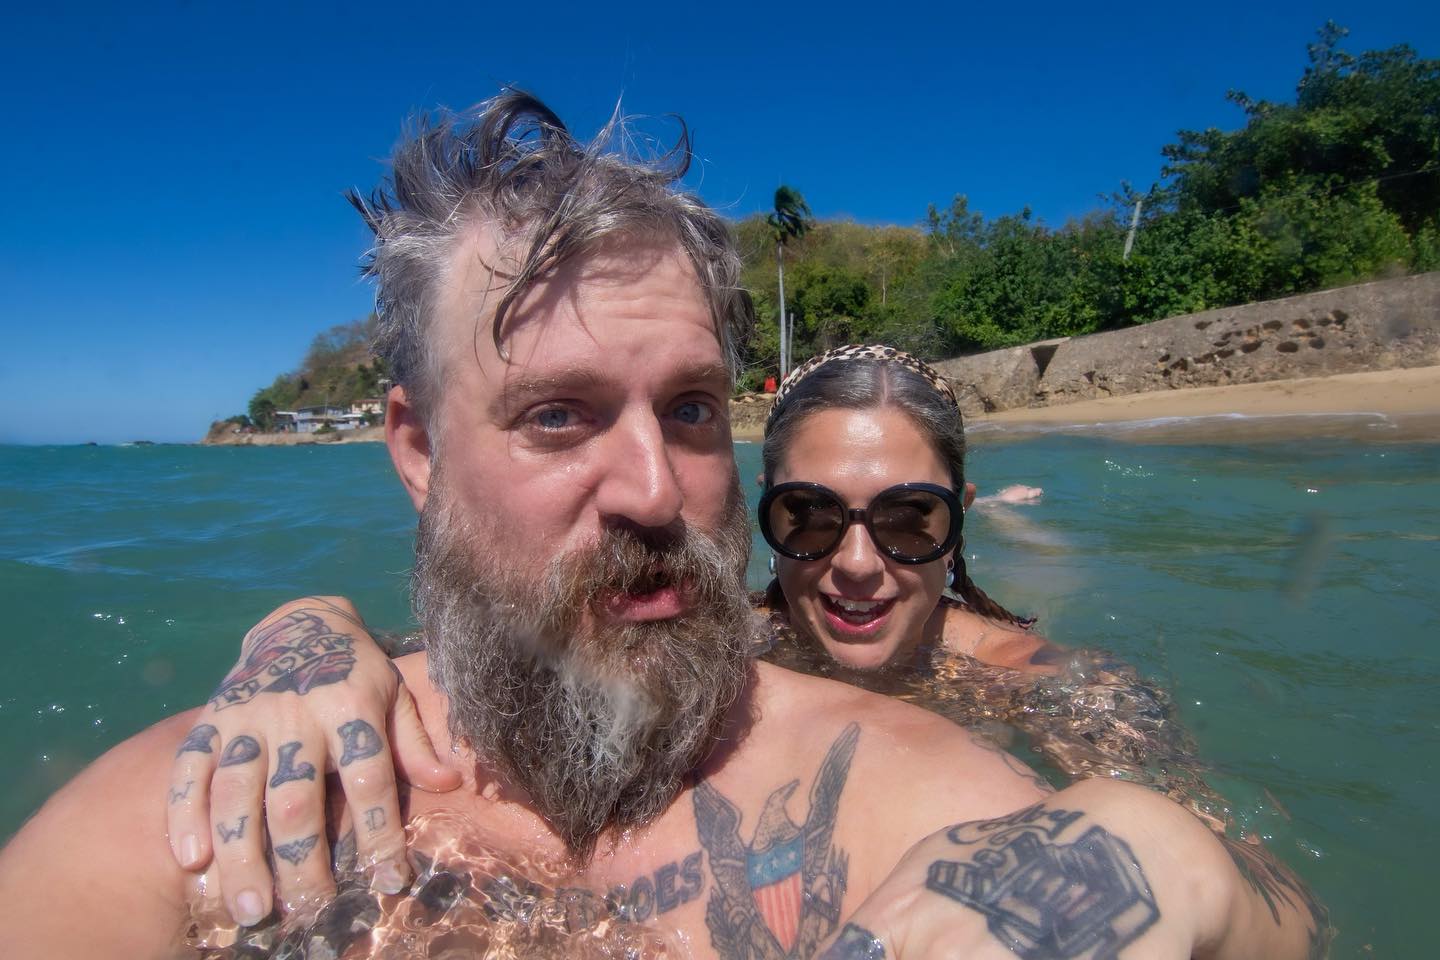 Danielle posed with fiance Jeremy Scheuch during their selfie in the ocean,